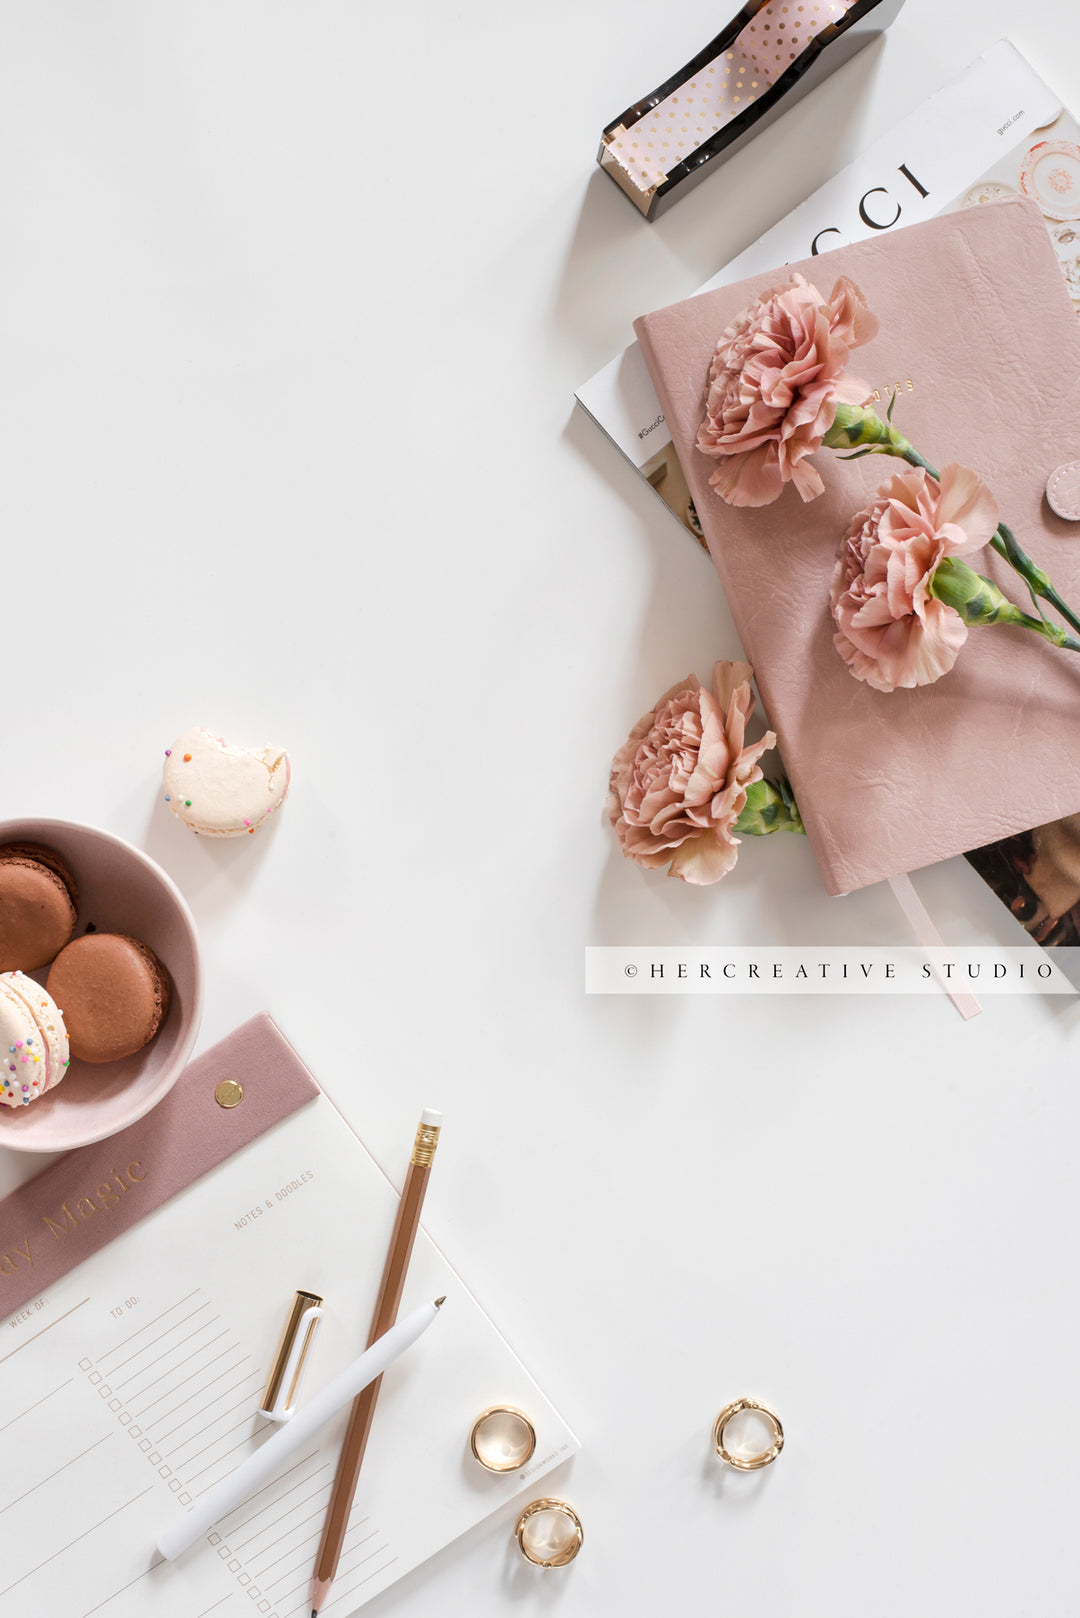 Daily Planner, Macarons & Carnations. Digital Image.